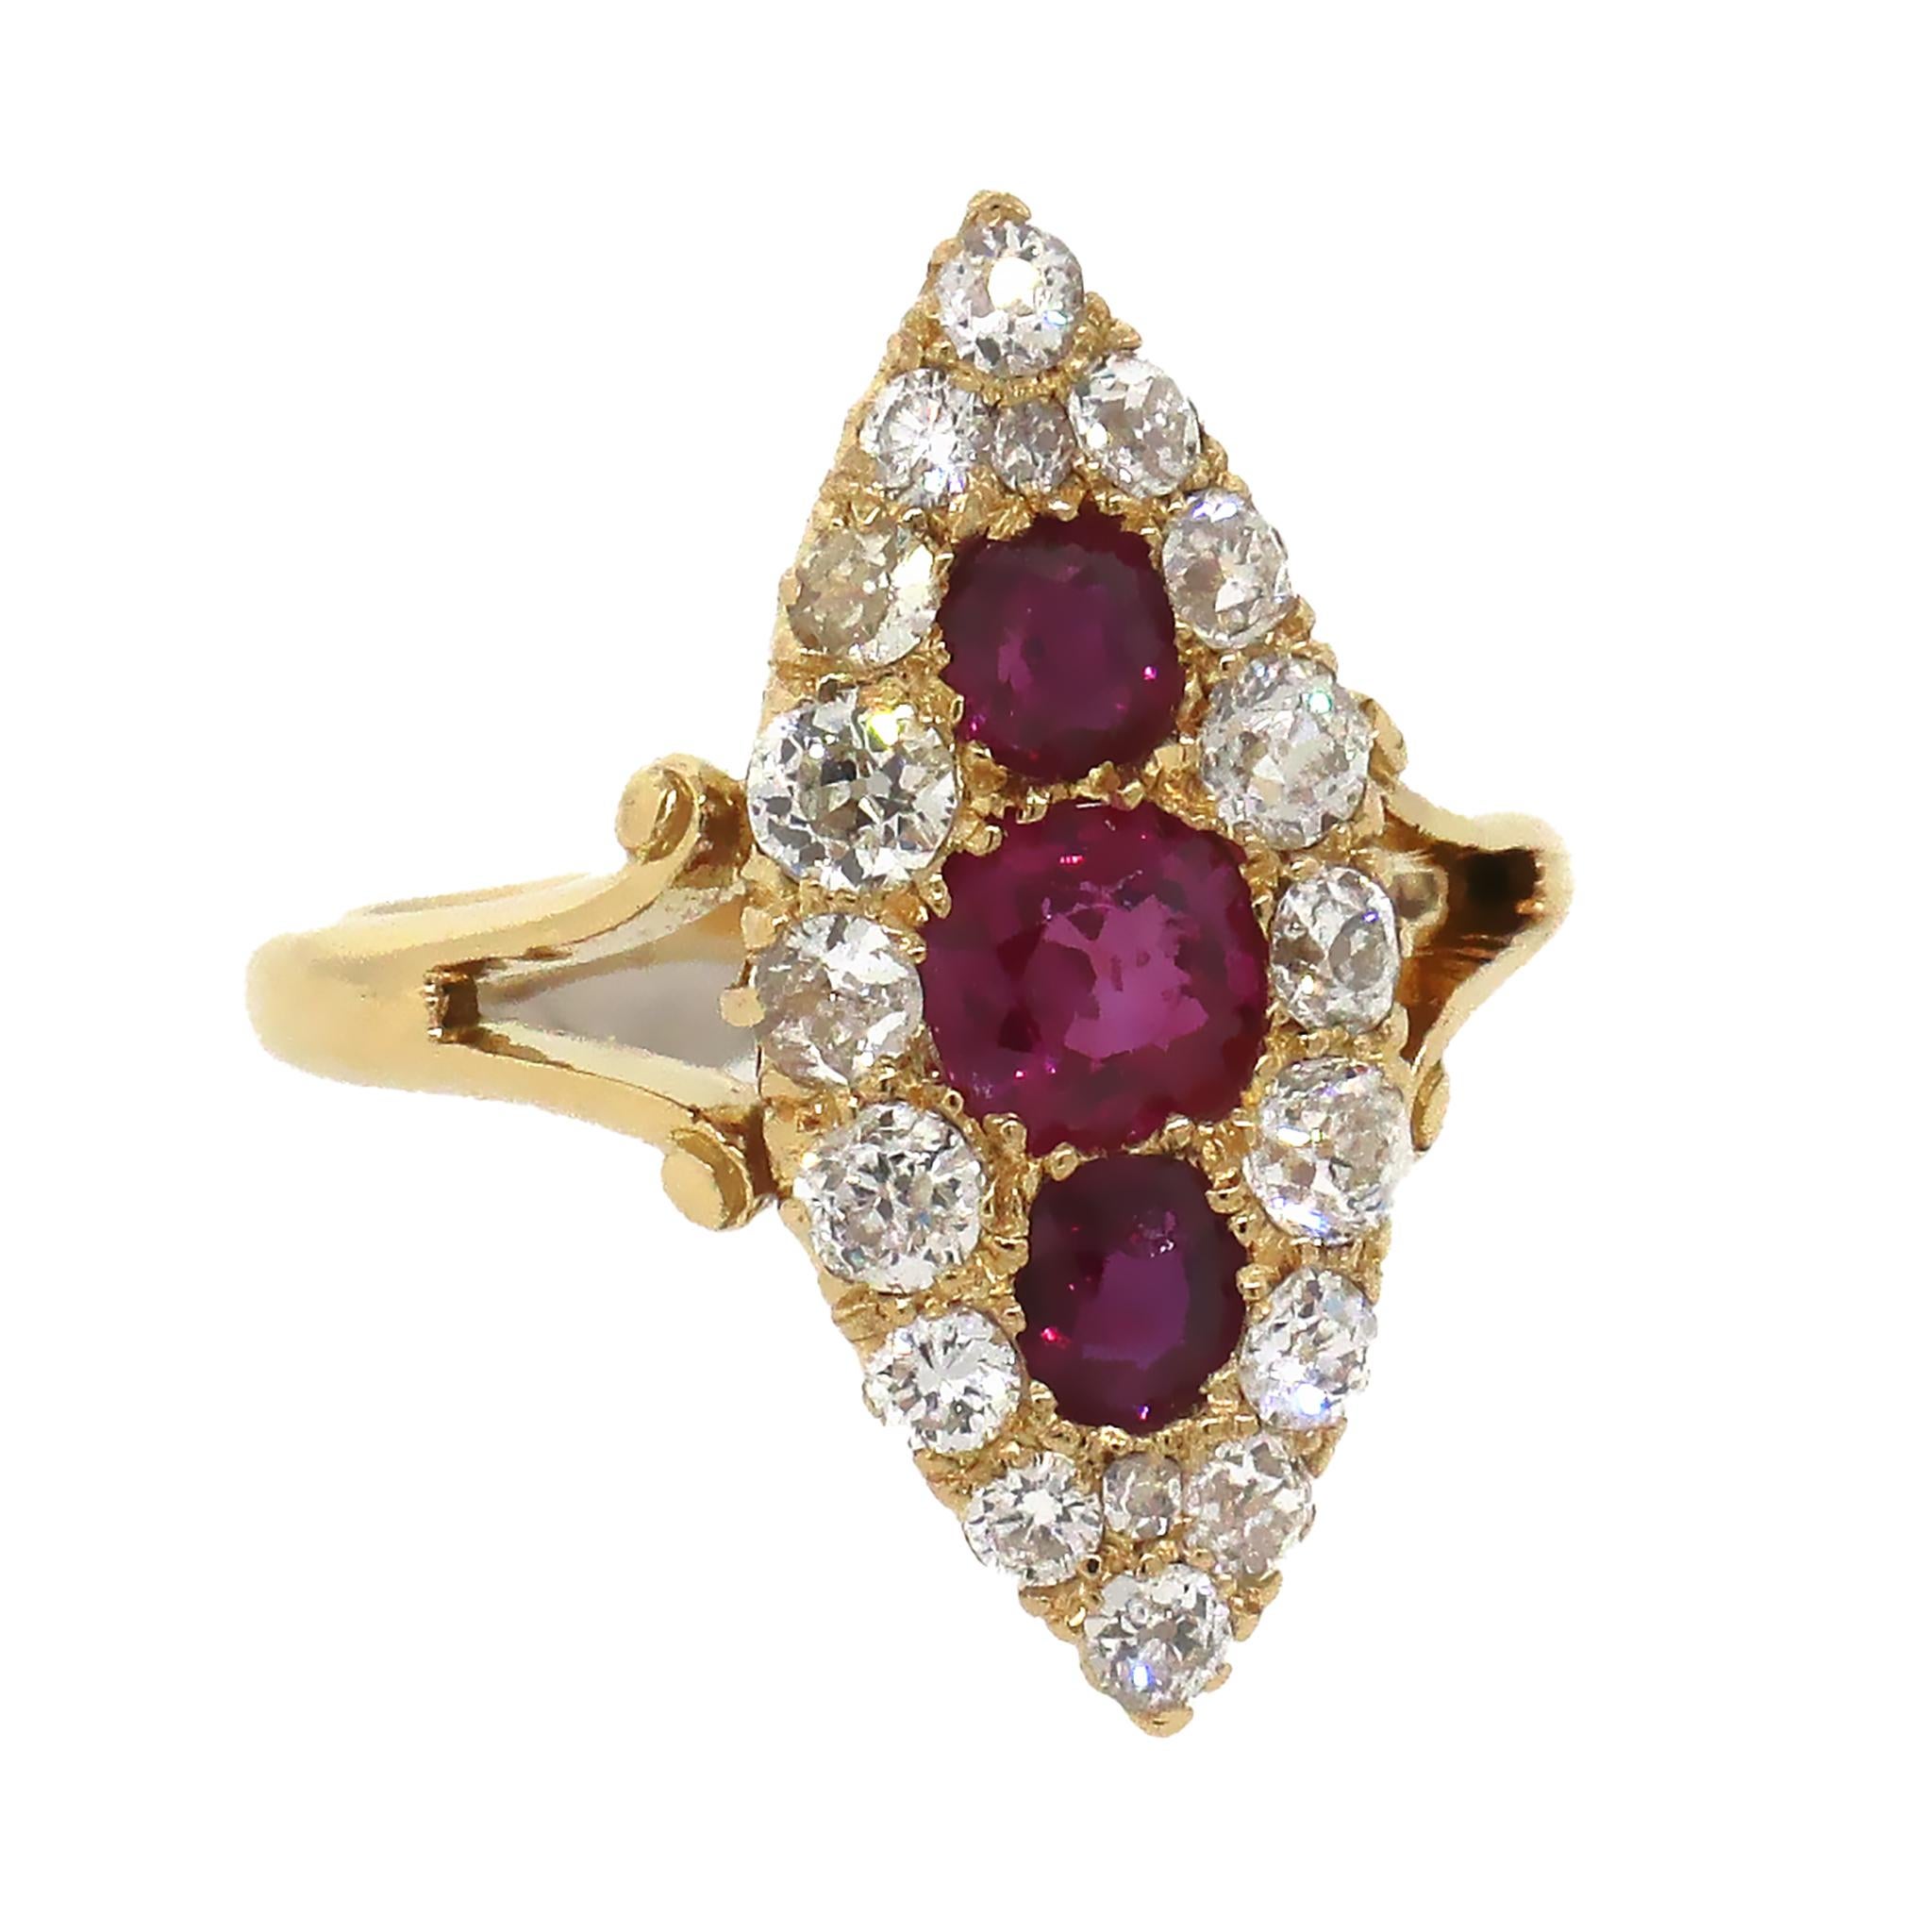 18 Diamonds total 1.20 ct
3 Burmese Rubies is 0.90 ctw
18 kt Yellow Gold
Length is 20mm
Width is 10mm
Ring Size 6
Total Weight: 4.34 grams